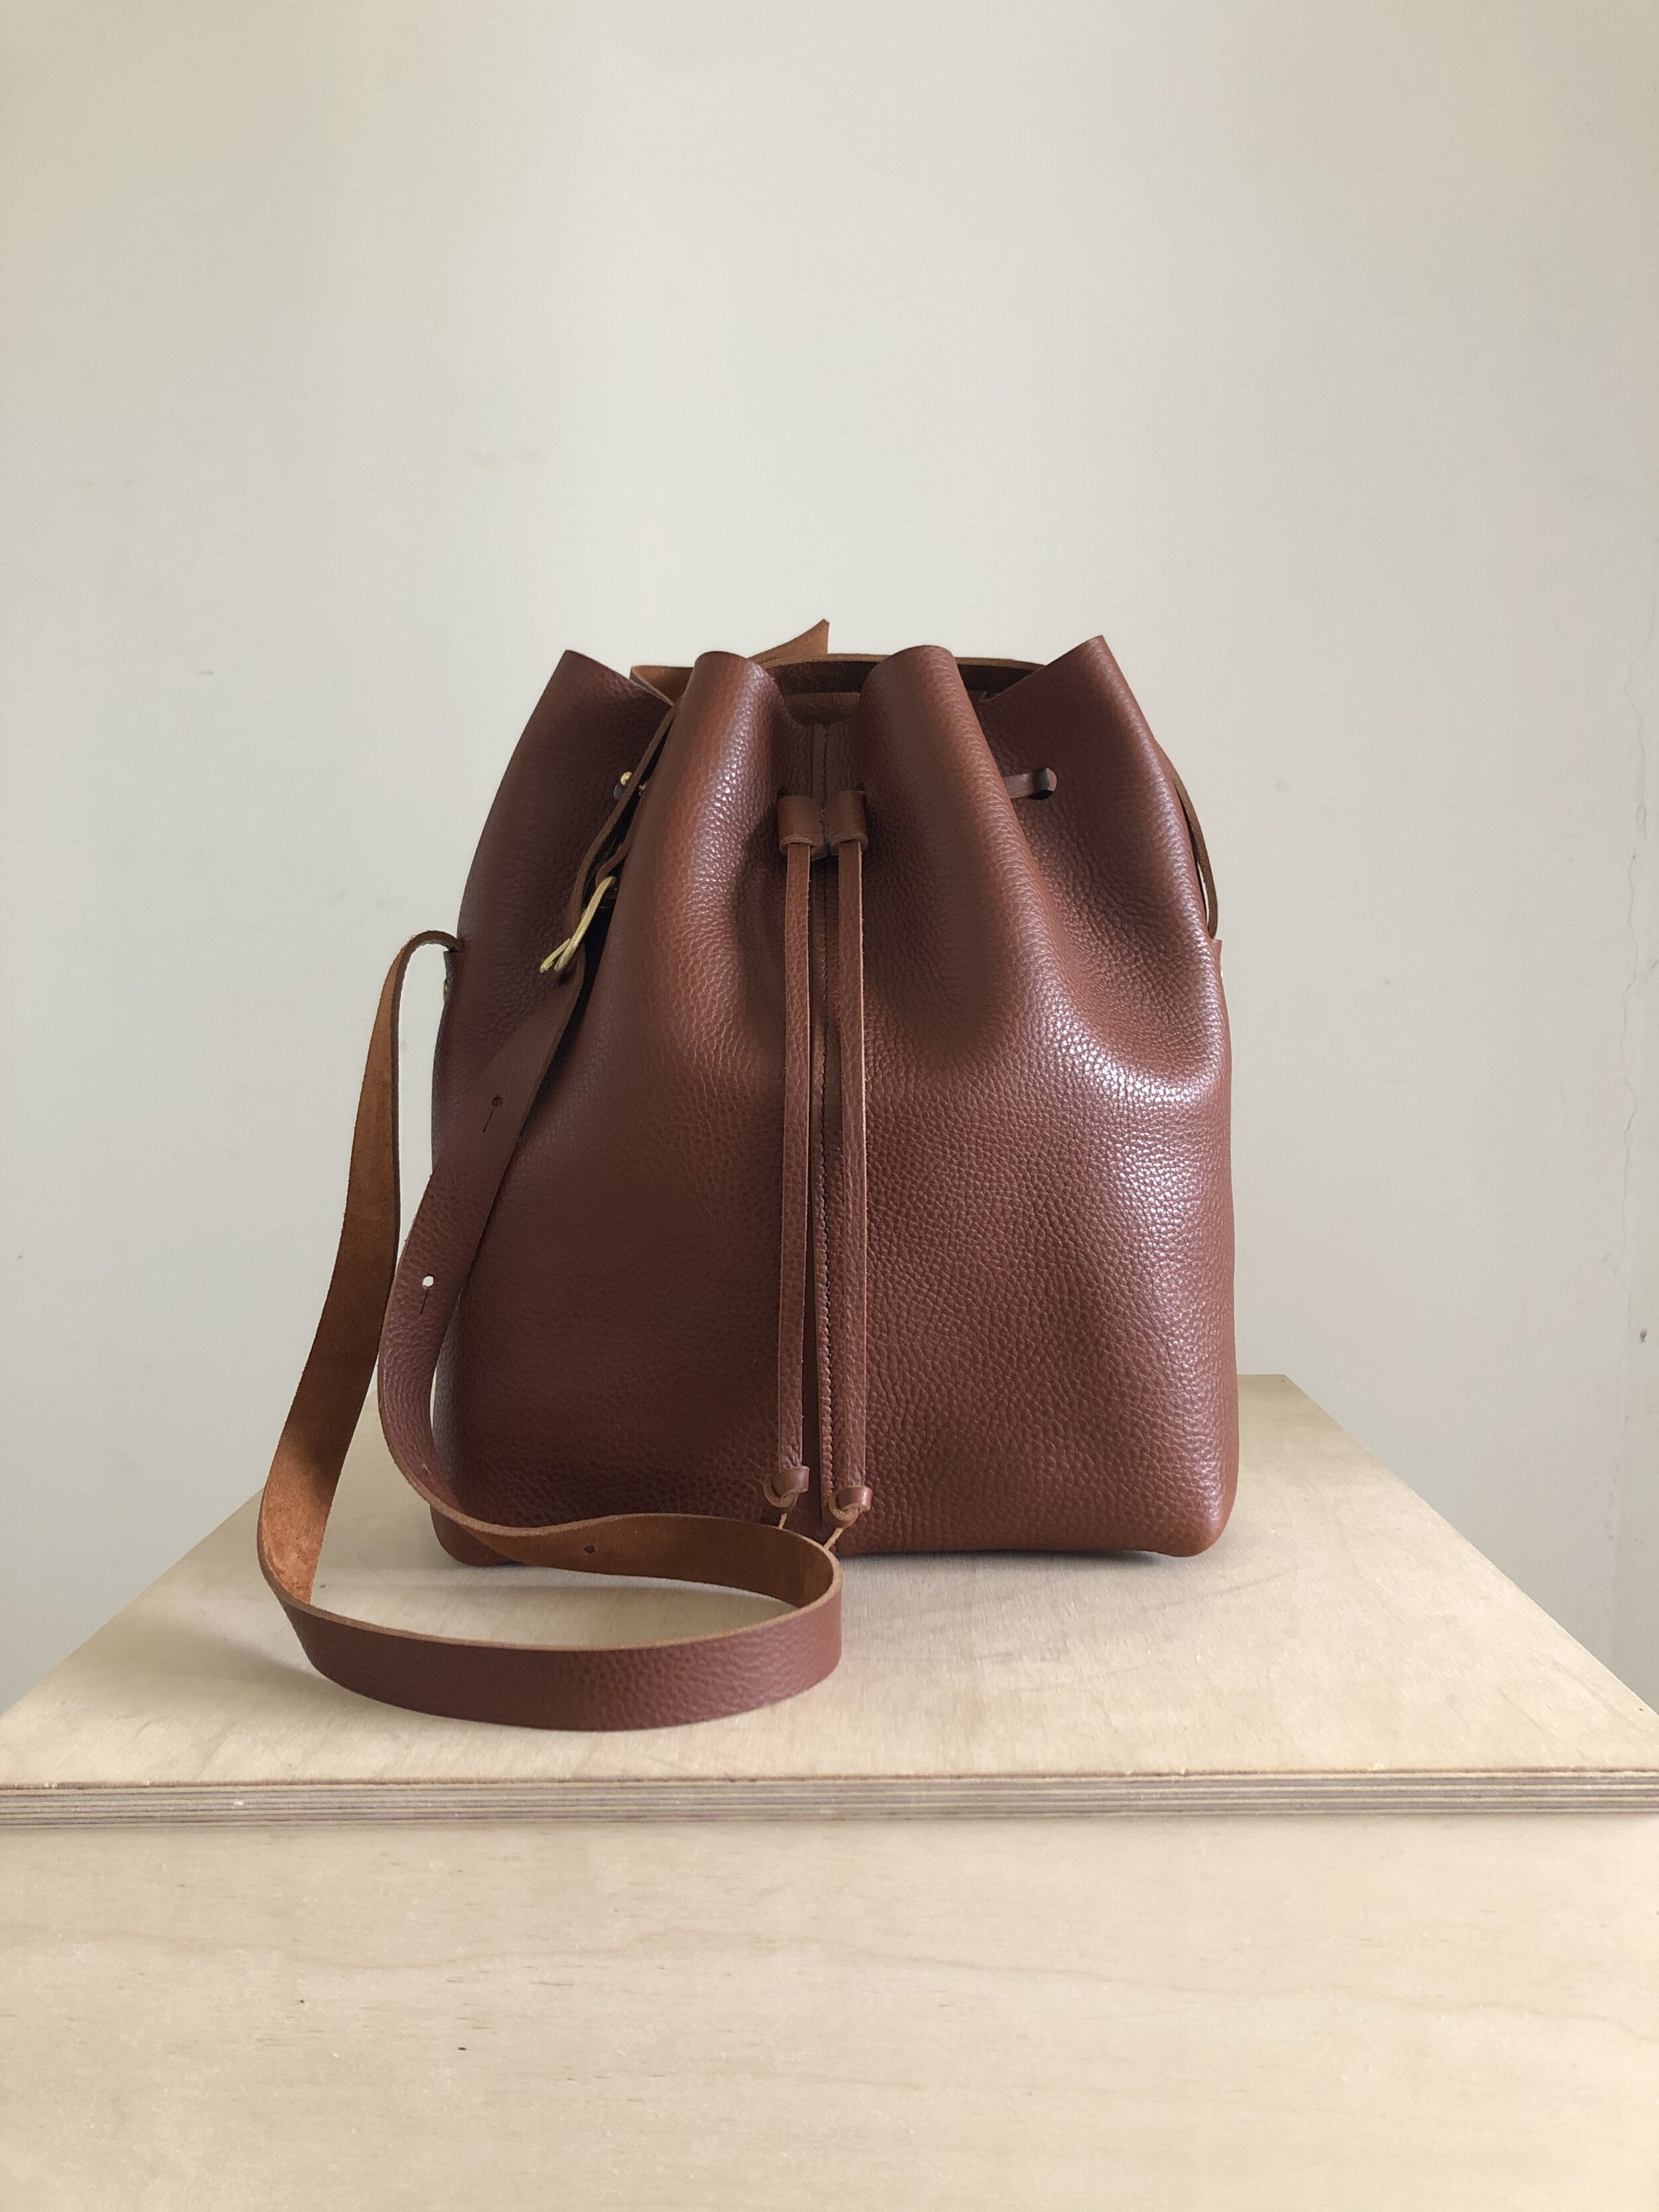 Carv Custom Made Sustainable Leather Bags, The Leather Bags Gallery Reviews